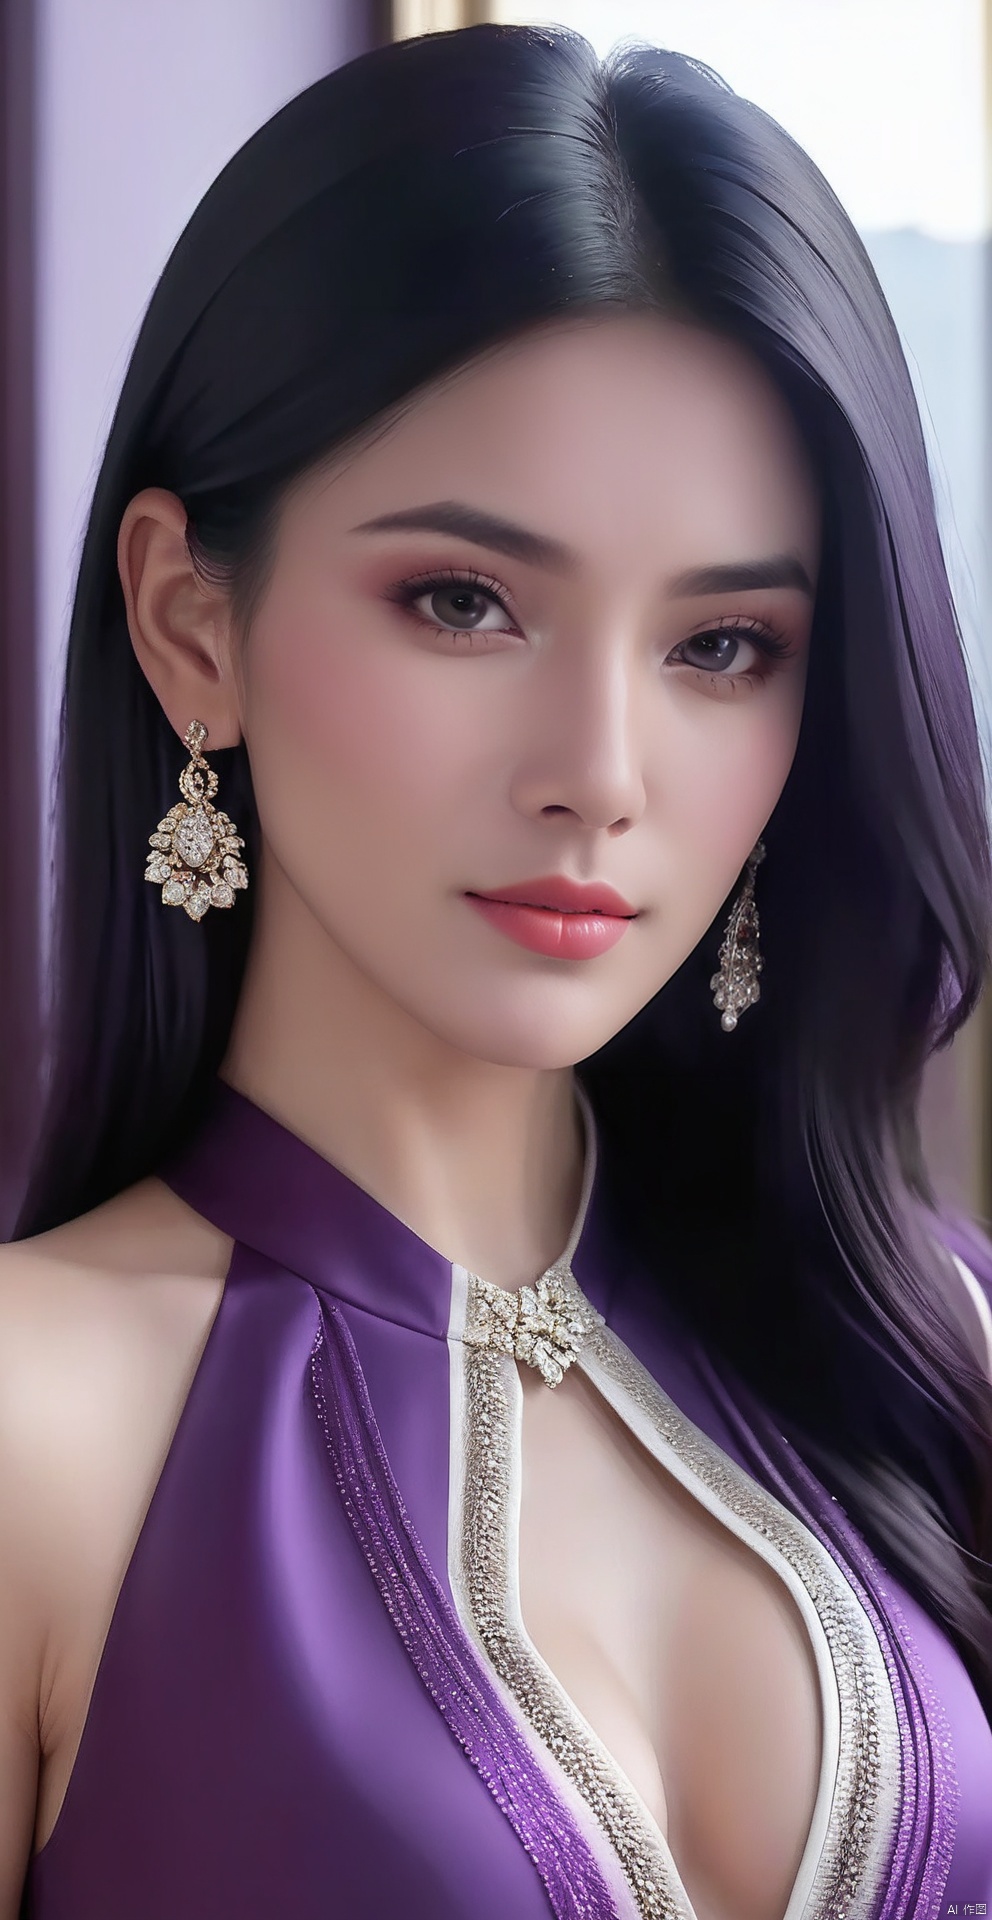 8k,RAW, Fujifilm XT3, masterpiece, best quality, photorealistic of 1girl ,solo, diamond stud earrings, long straight black hair, hazel eyes, serious expression, slender figure, wearing a purple blouse,masterpiece,1girl,purple dress,(upper body shot), (full body view),best quality,long hair, black hair,purple transparent shawl,earrings,beautiful symmetrical face,in the style of elegant clothing,skin white and smooth,high heels,g007,